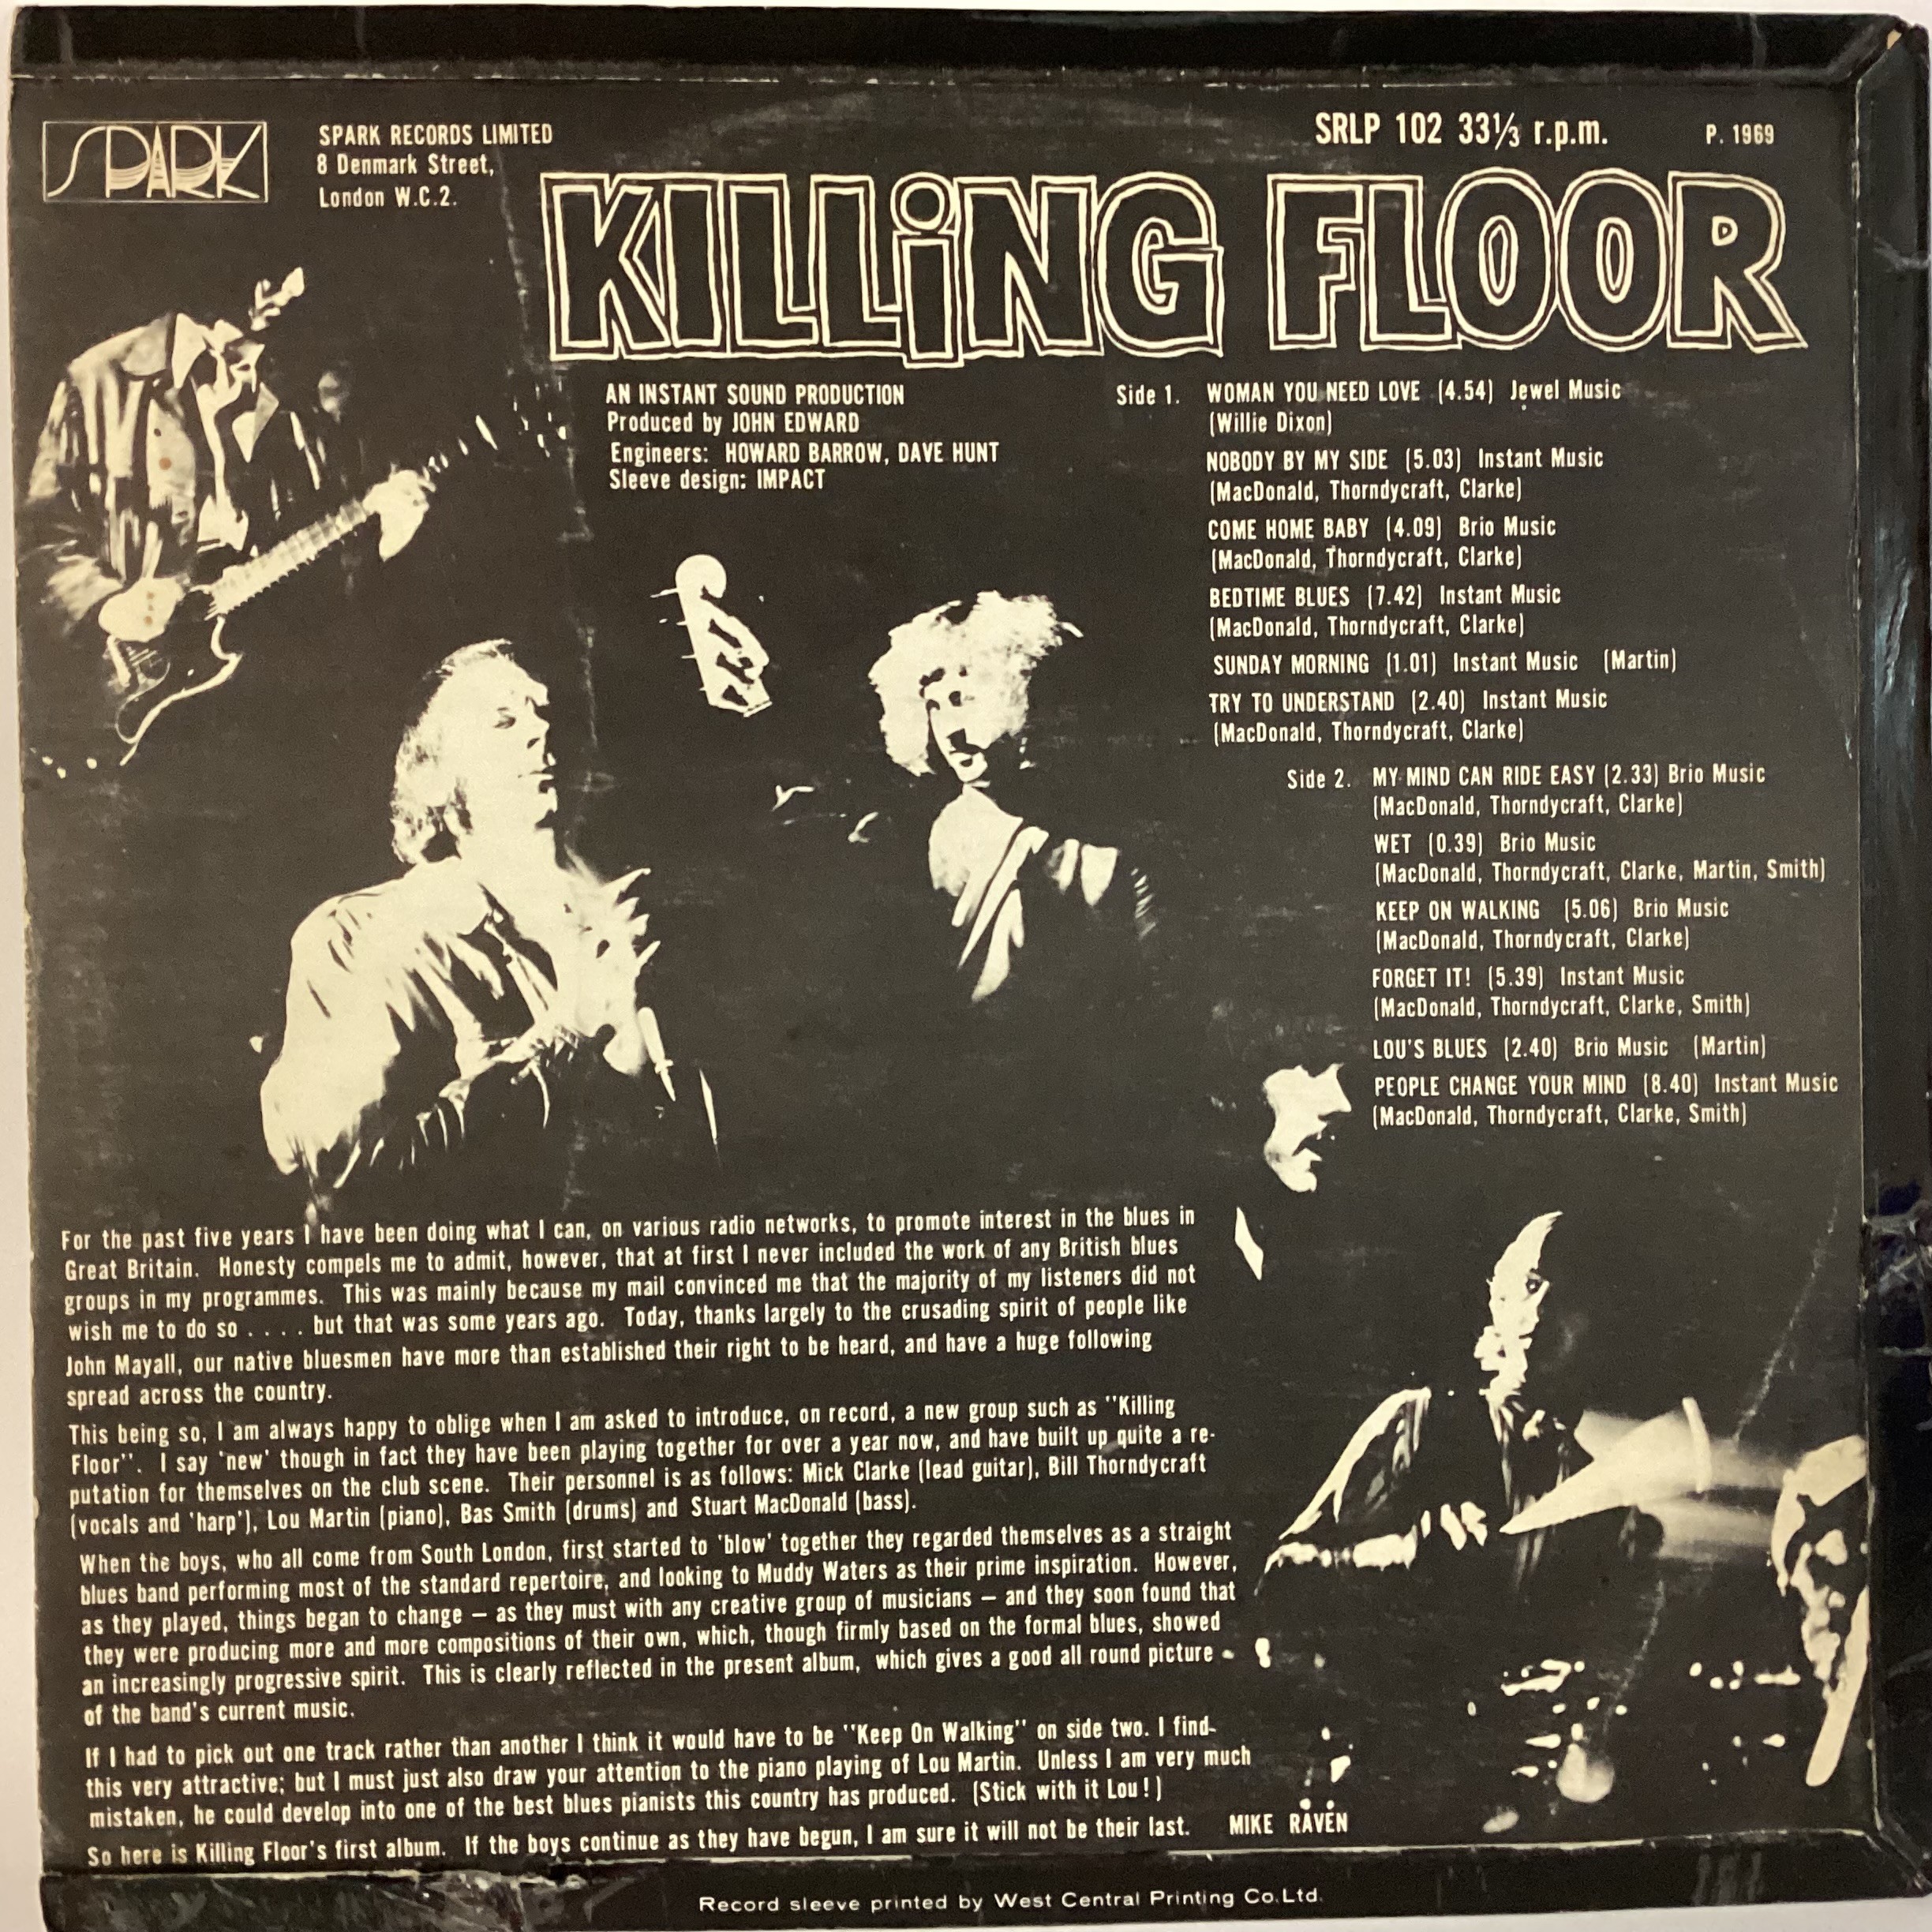 KILLING FLOOR SELF TITLED VINYL LP RECORD. This rare vinyl is found here on Spark Records SRLP 102 - Image 2 of 6